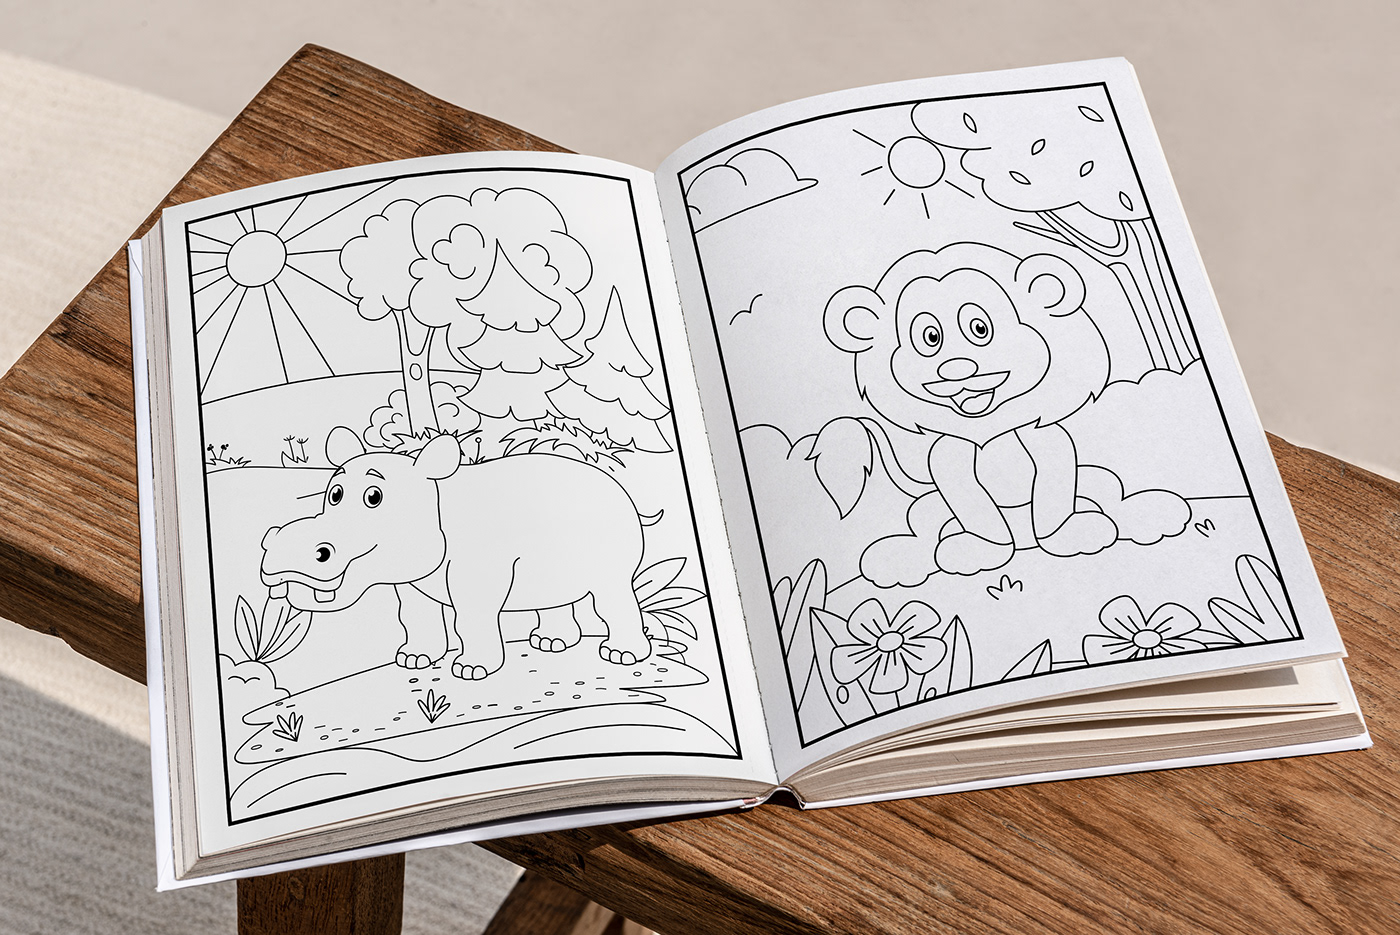 coloring page coloring book color pages illustrations kids book baby animal kids illustration children's book animal coloring kdp coloring